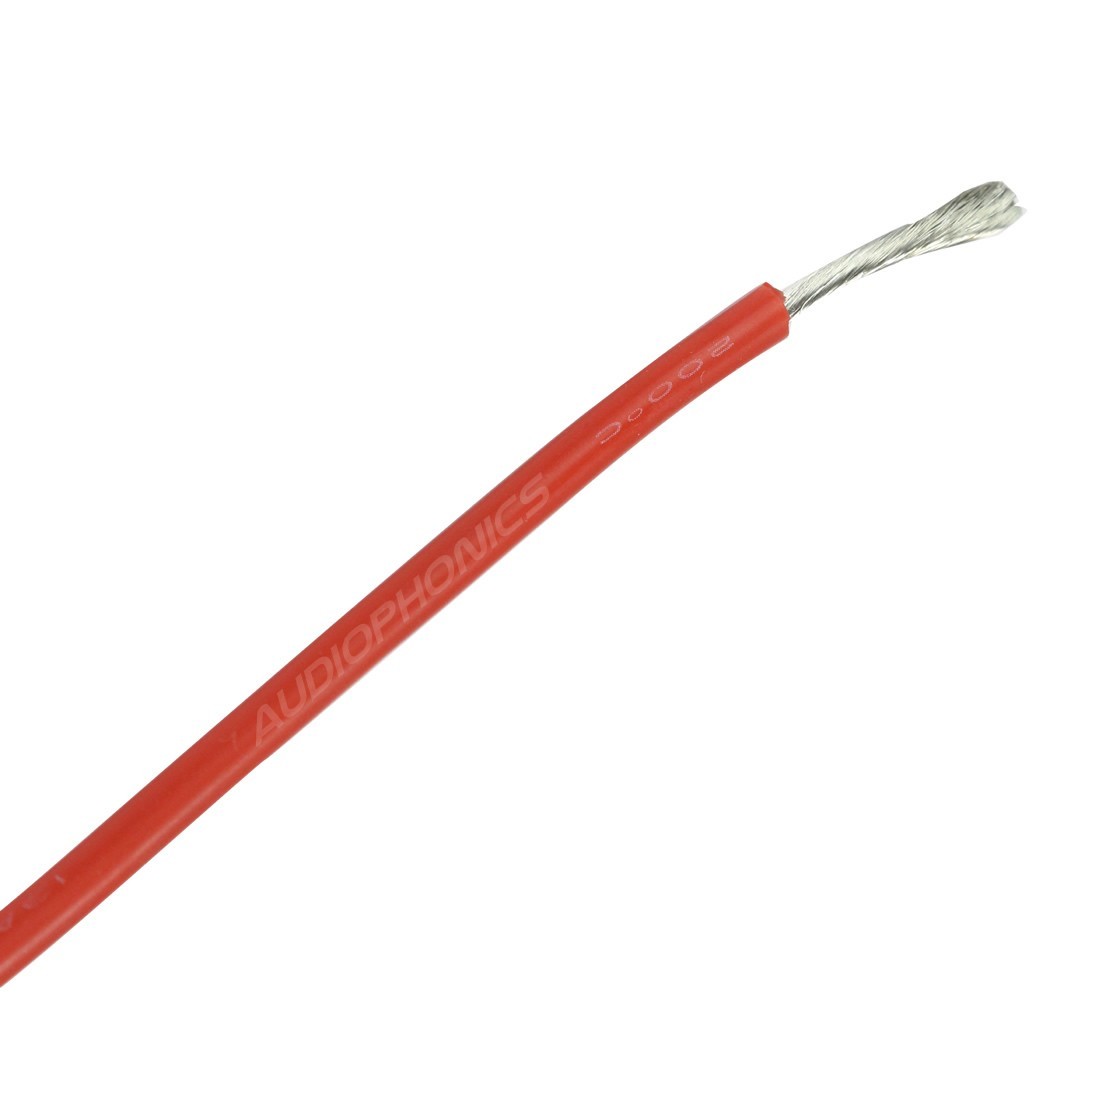 Mono-conductor silicon cable 18AWG 0.823mm² (Red)